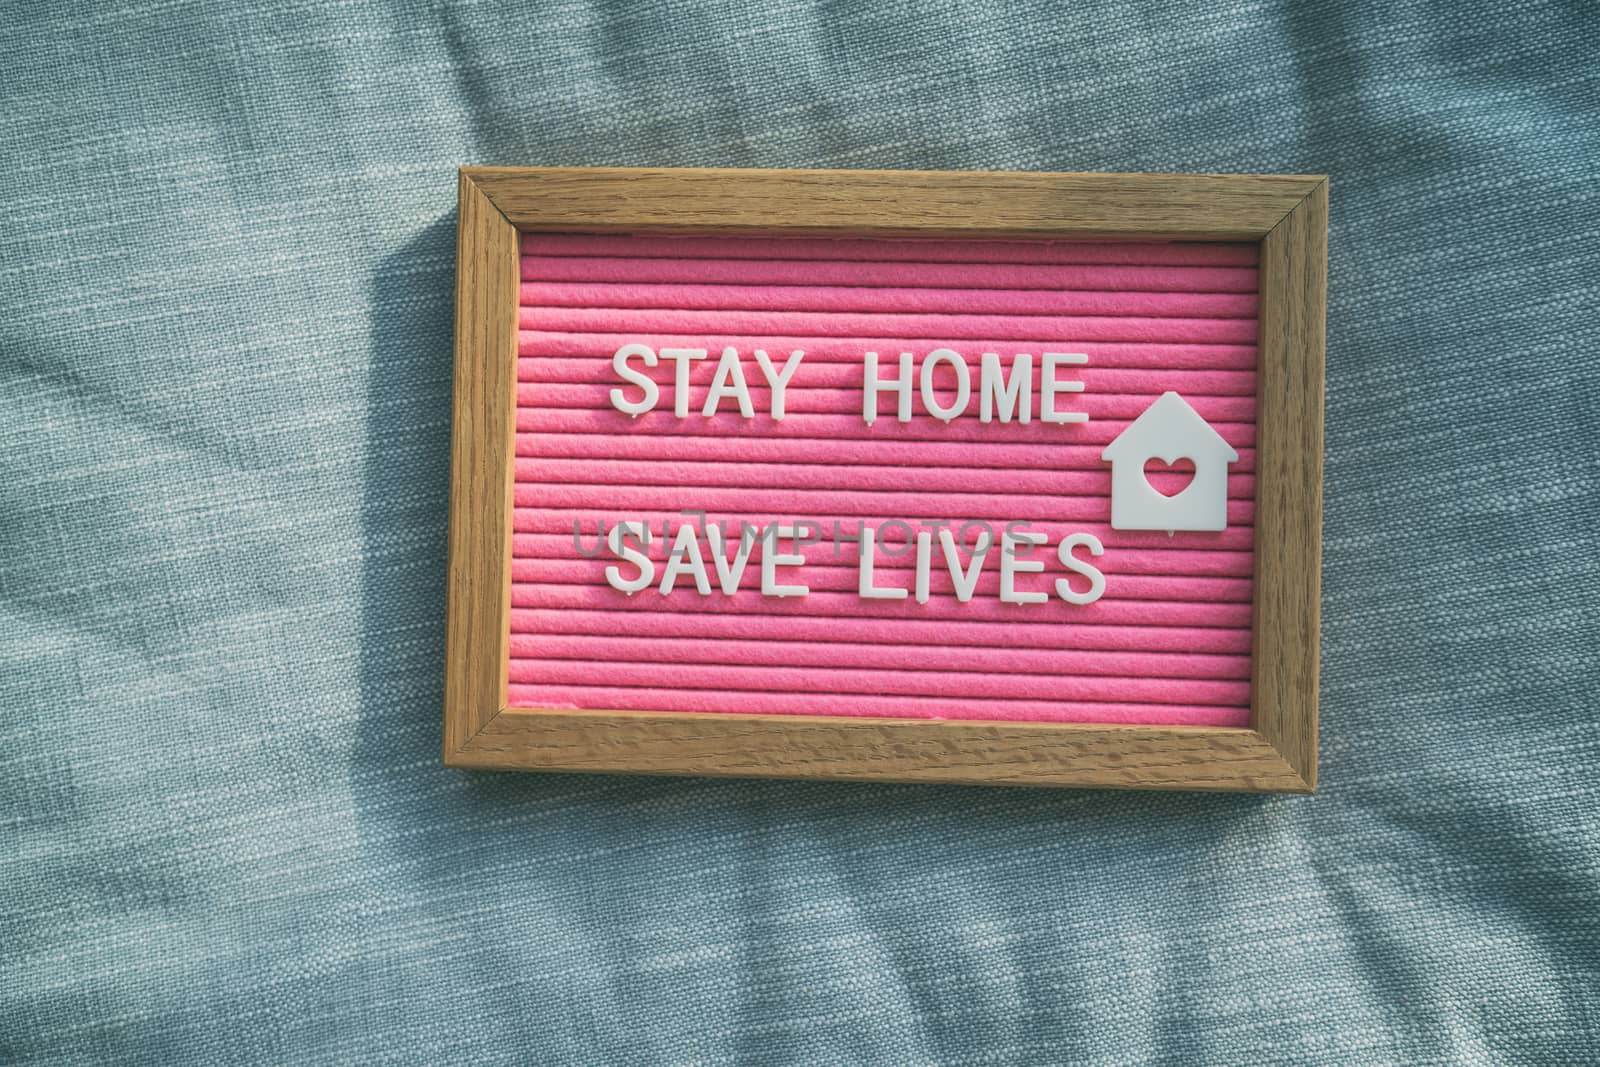 Coronavirus quote stay home, save lives pink felt board sign with message of self isolation for social responsability on home sofa background. COVID-19 text to promote staying at home by Maridav